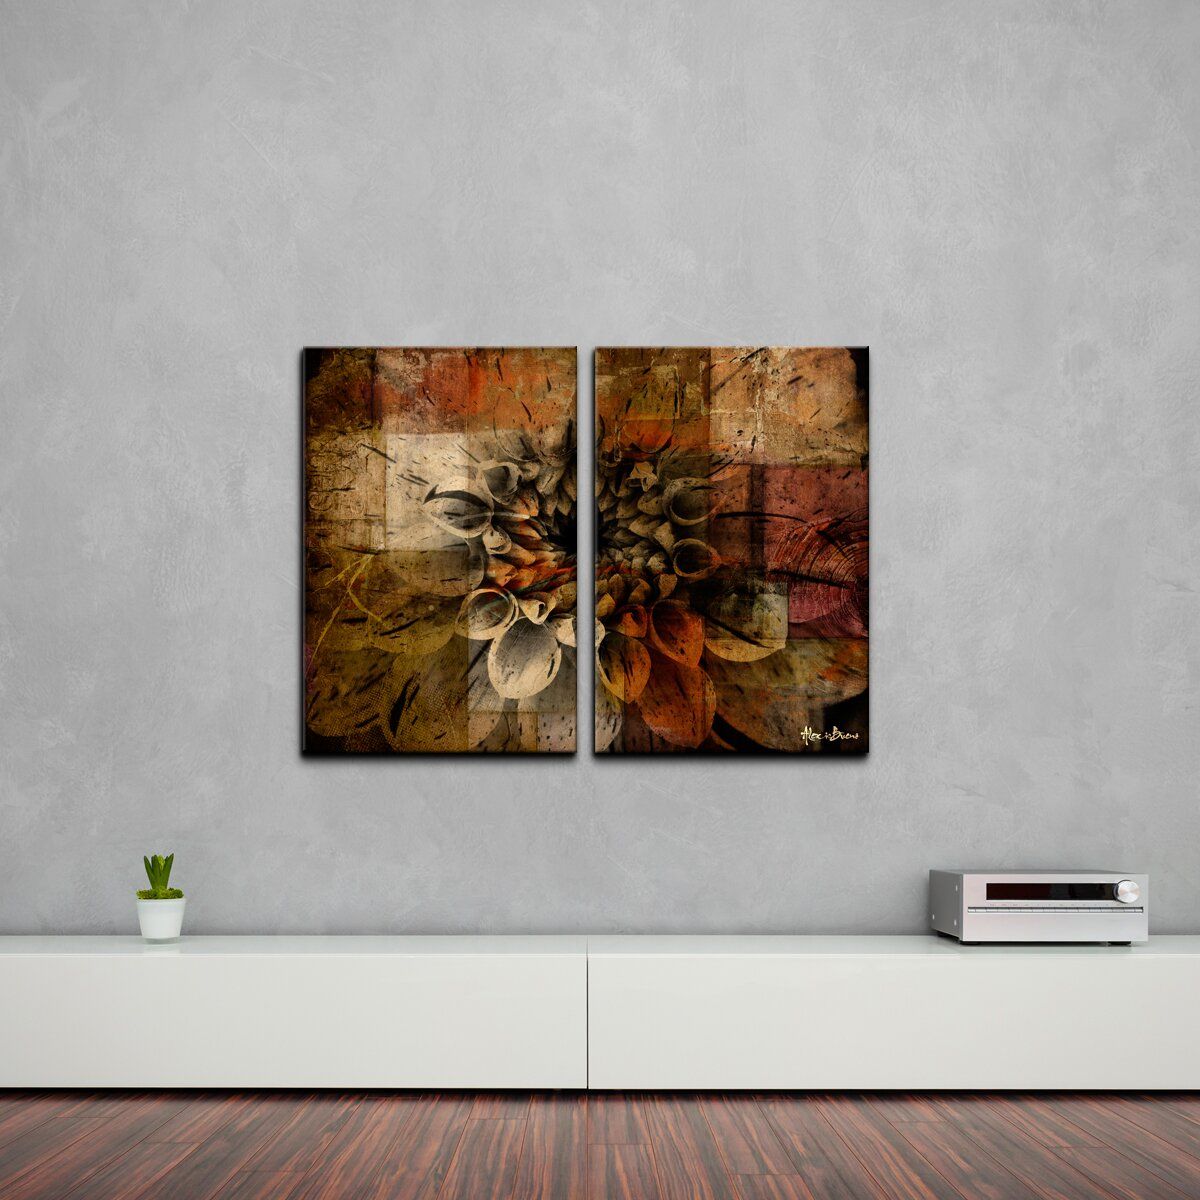 Ready2Hangart Oversized 'Daisy' Abstract 2 Piece Canvas Wall Art Intended For 2 Piece Circle Wall Art (View 6 of 15)